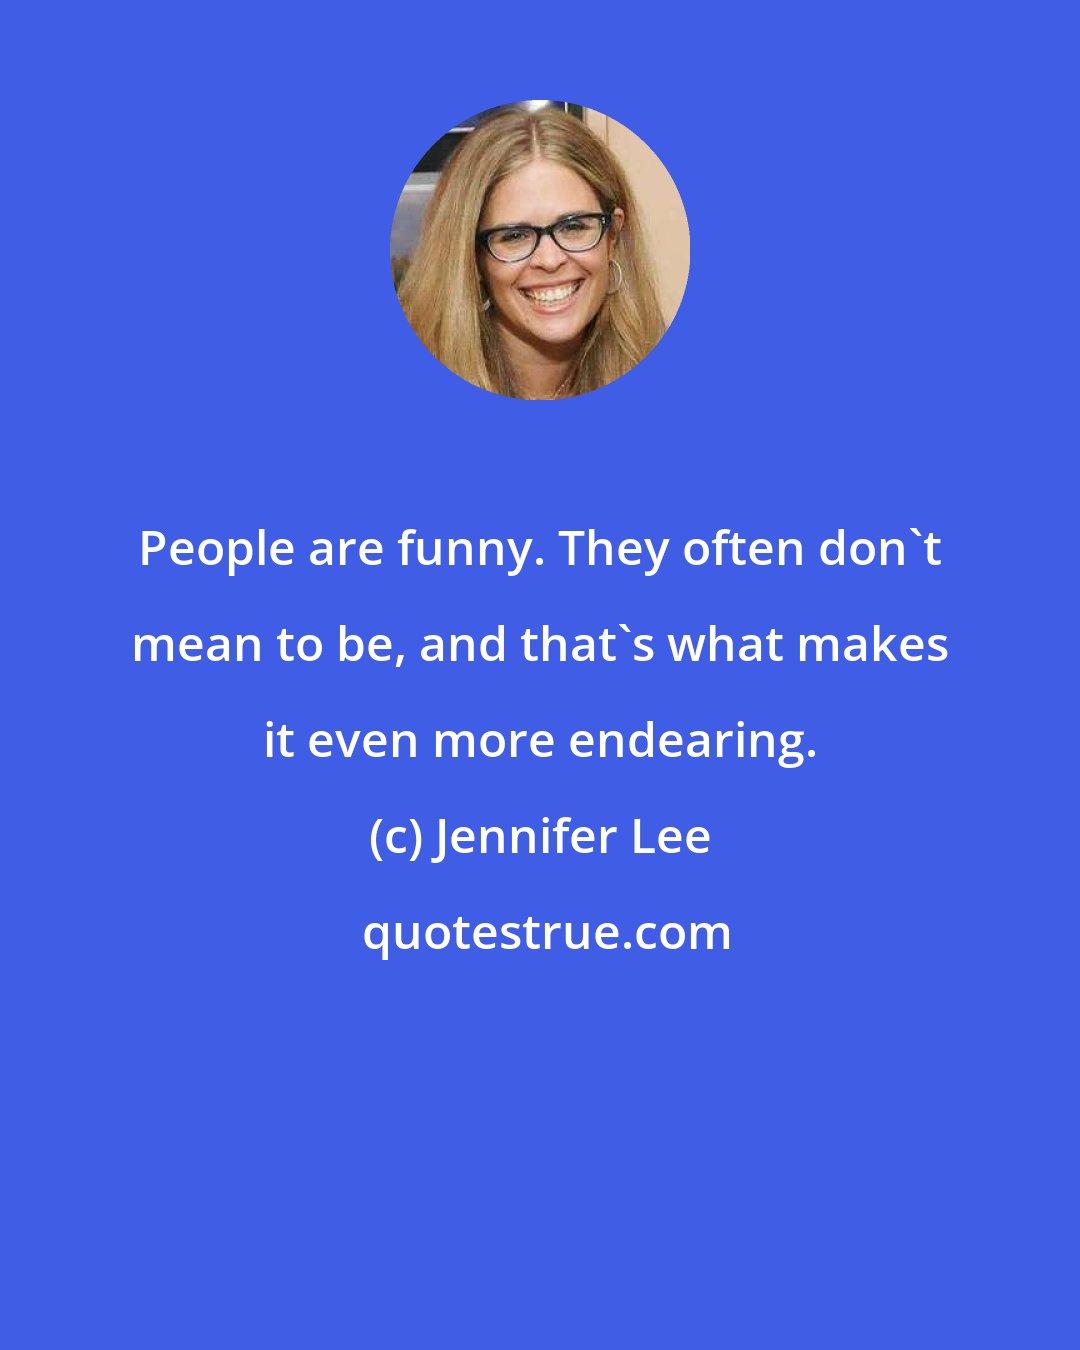 Jennifer Lee: People are funny. They often don't mean to be, and that's what makes it even more endearing.